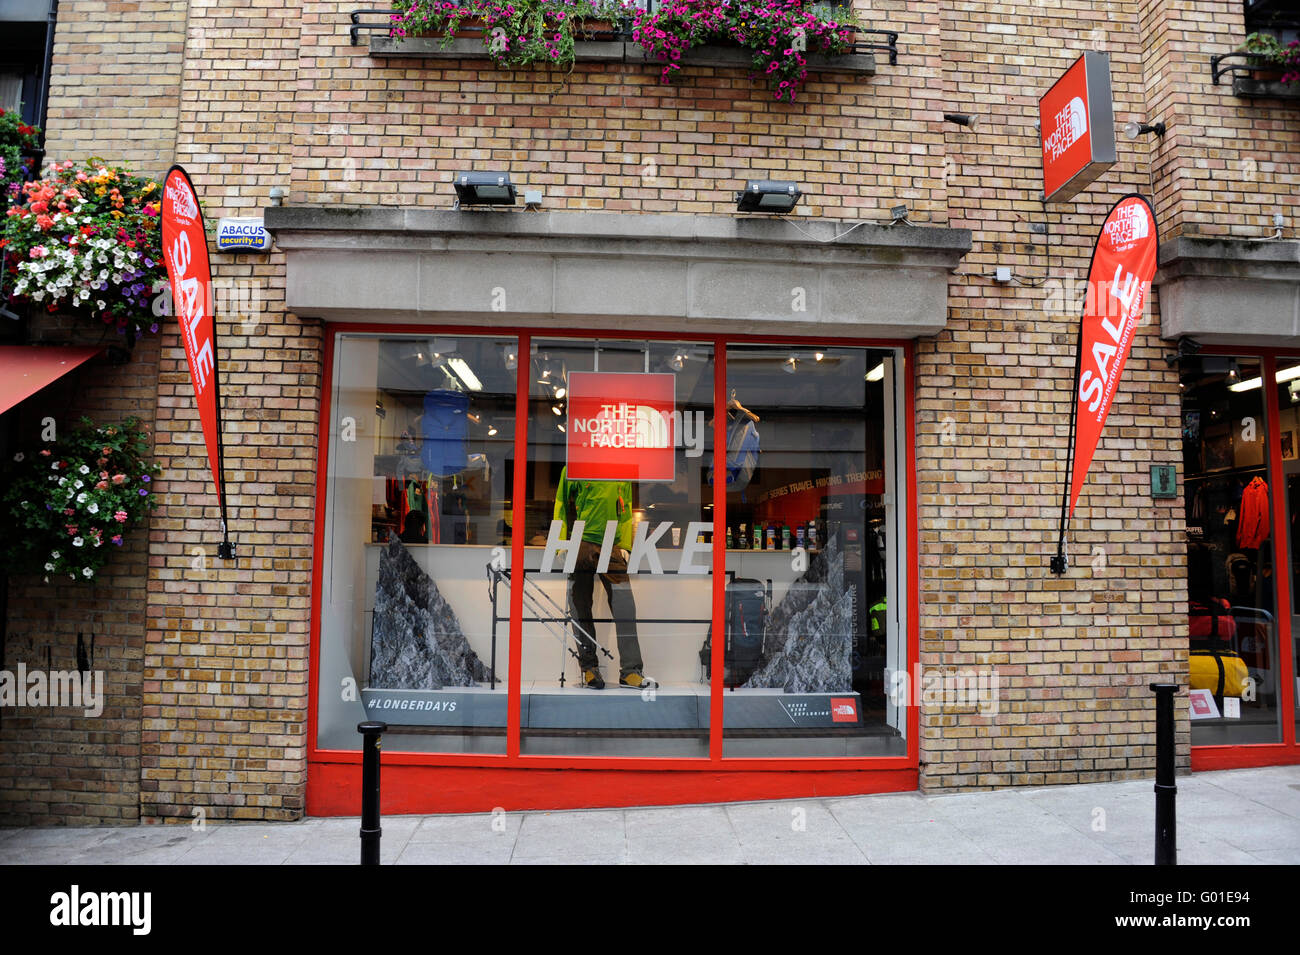 The north face shop hi-res stock photography and images - Alamy